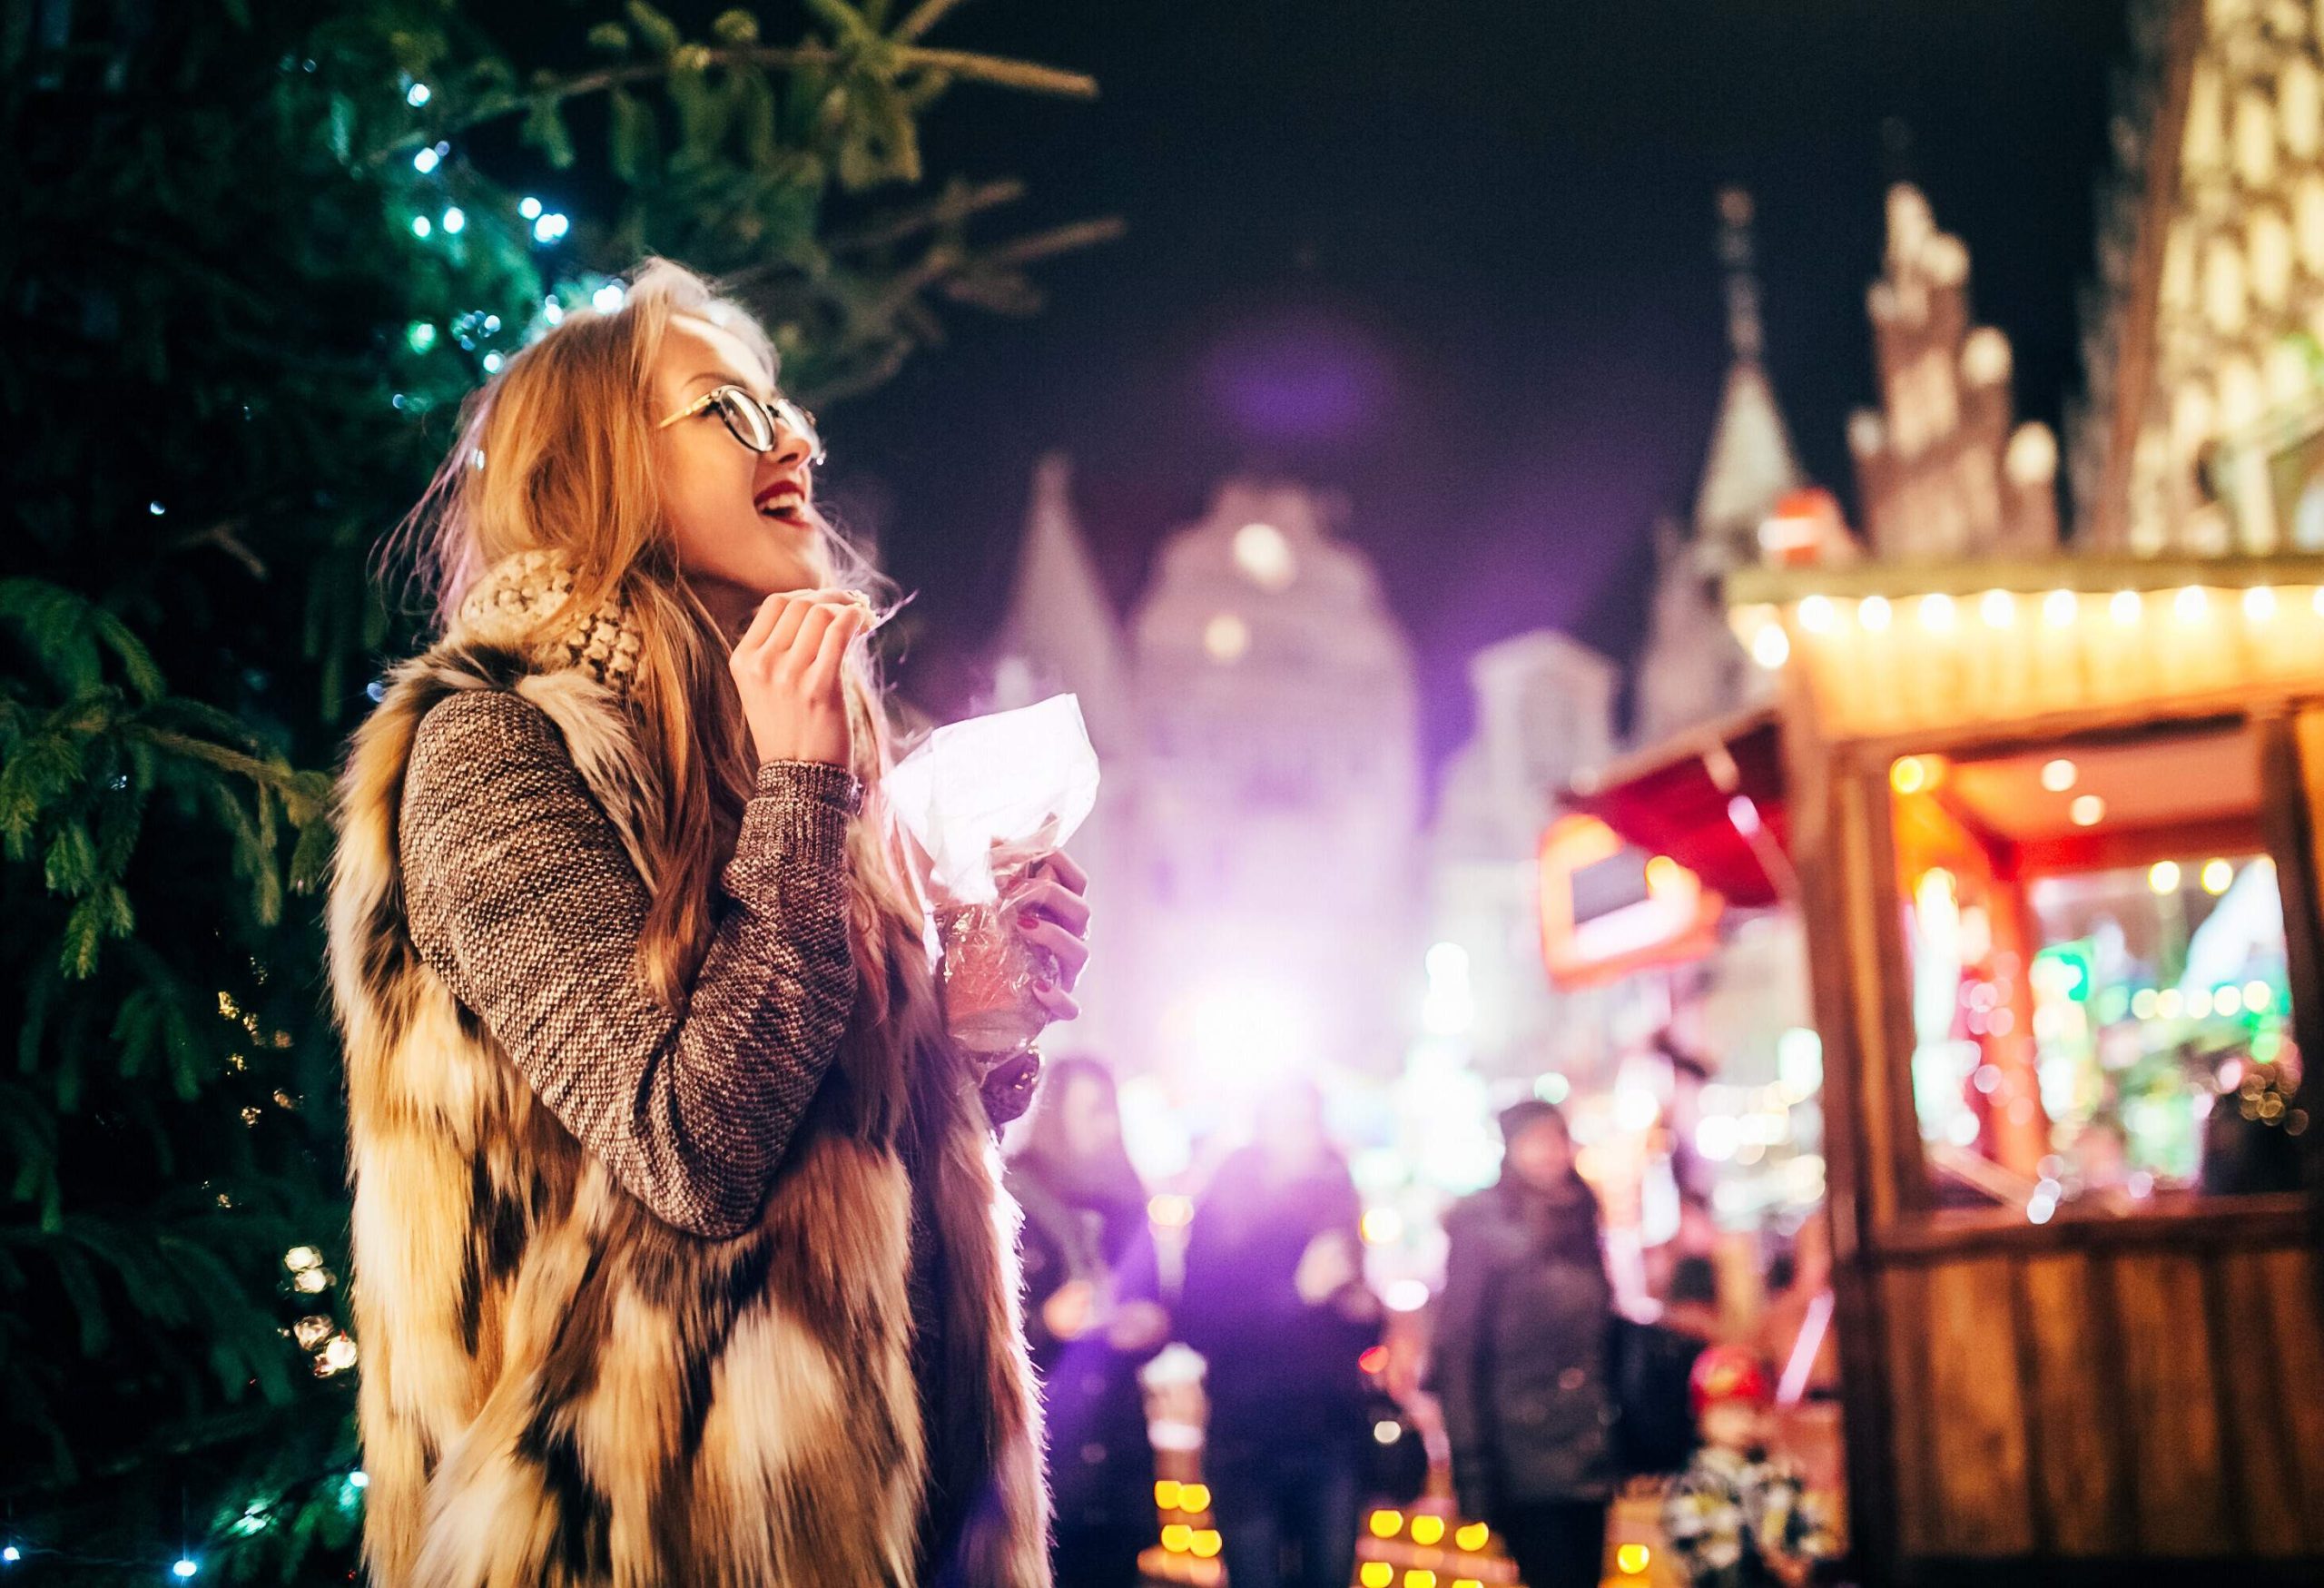 A blonde woman in fur and glasses smiles as she looks up at holiday lights while holding a snack.